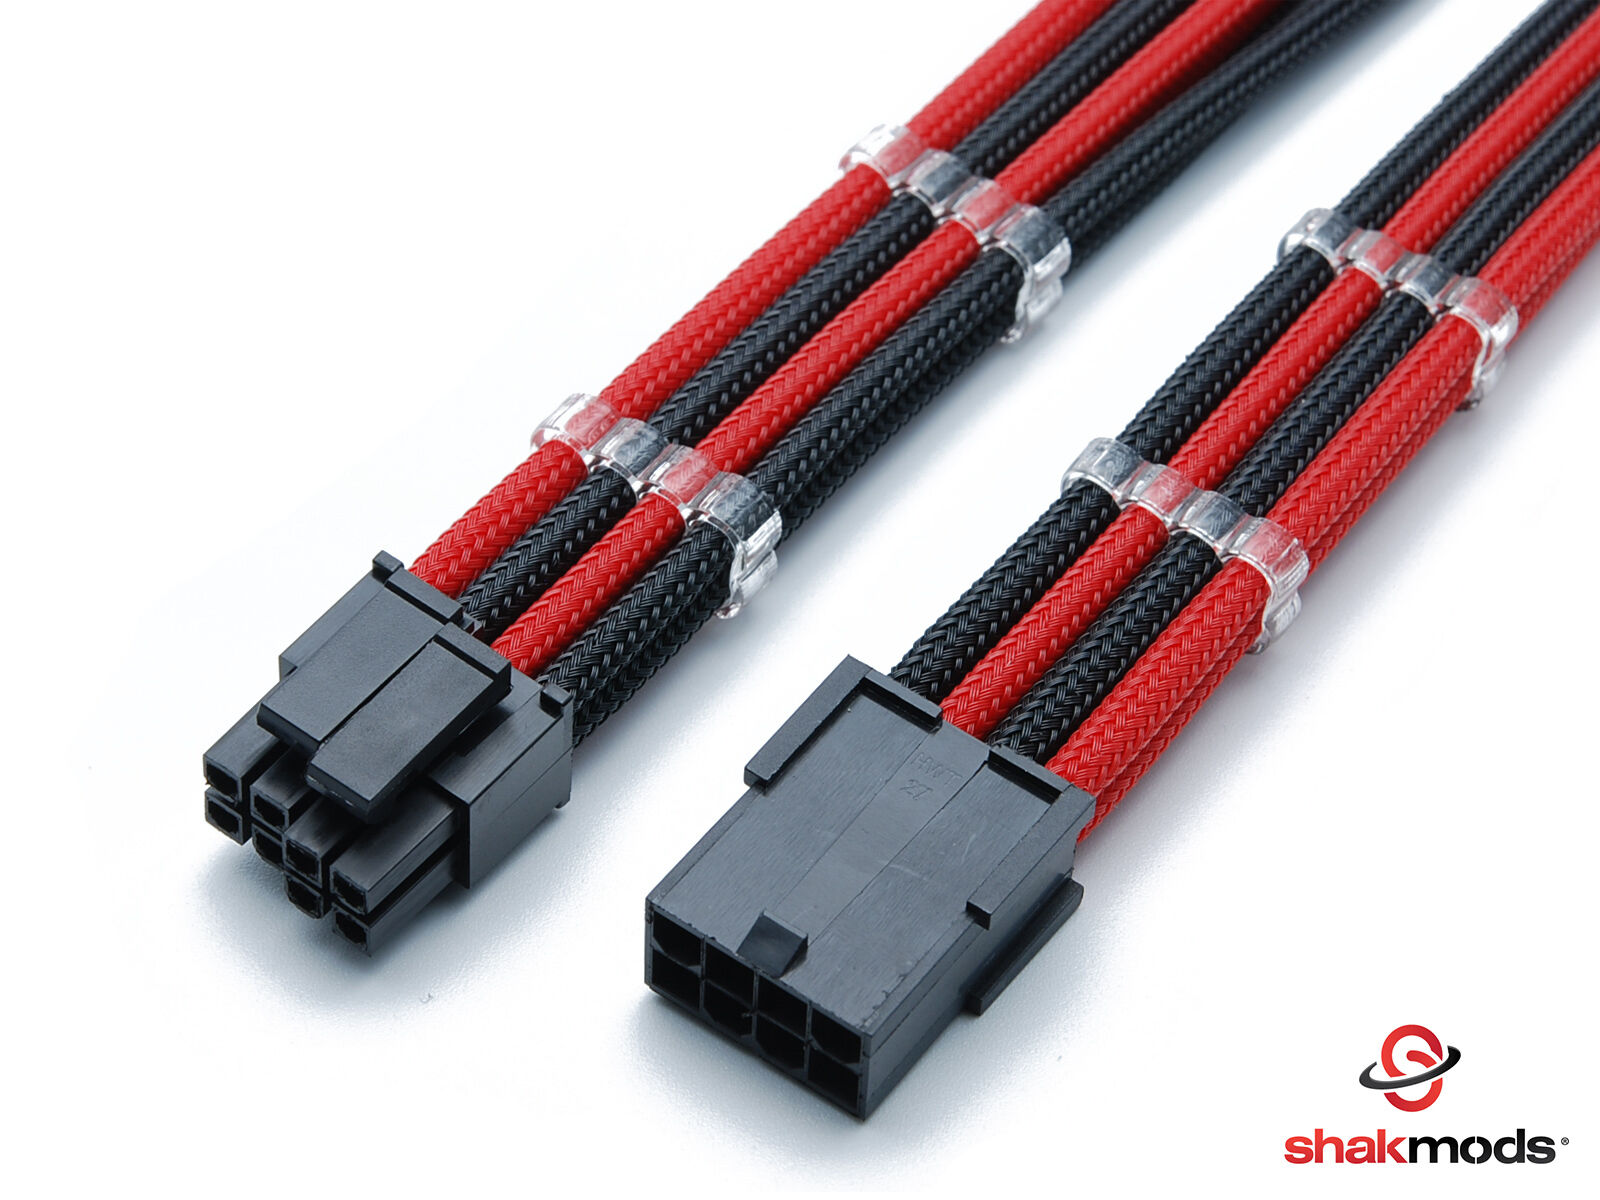 4 + 4 Pin ATX CPU Black Red Sleeved Extension Cable 30cm Shakmods 2 Cable Combs